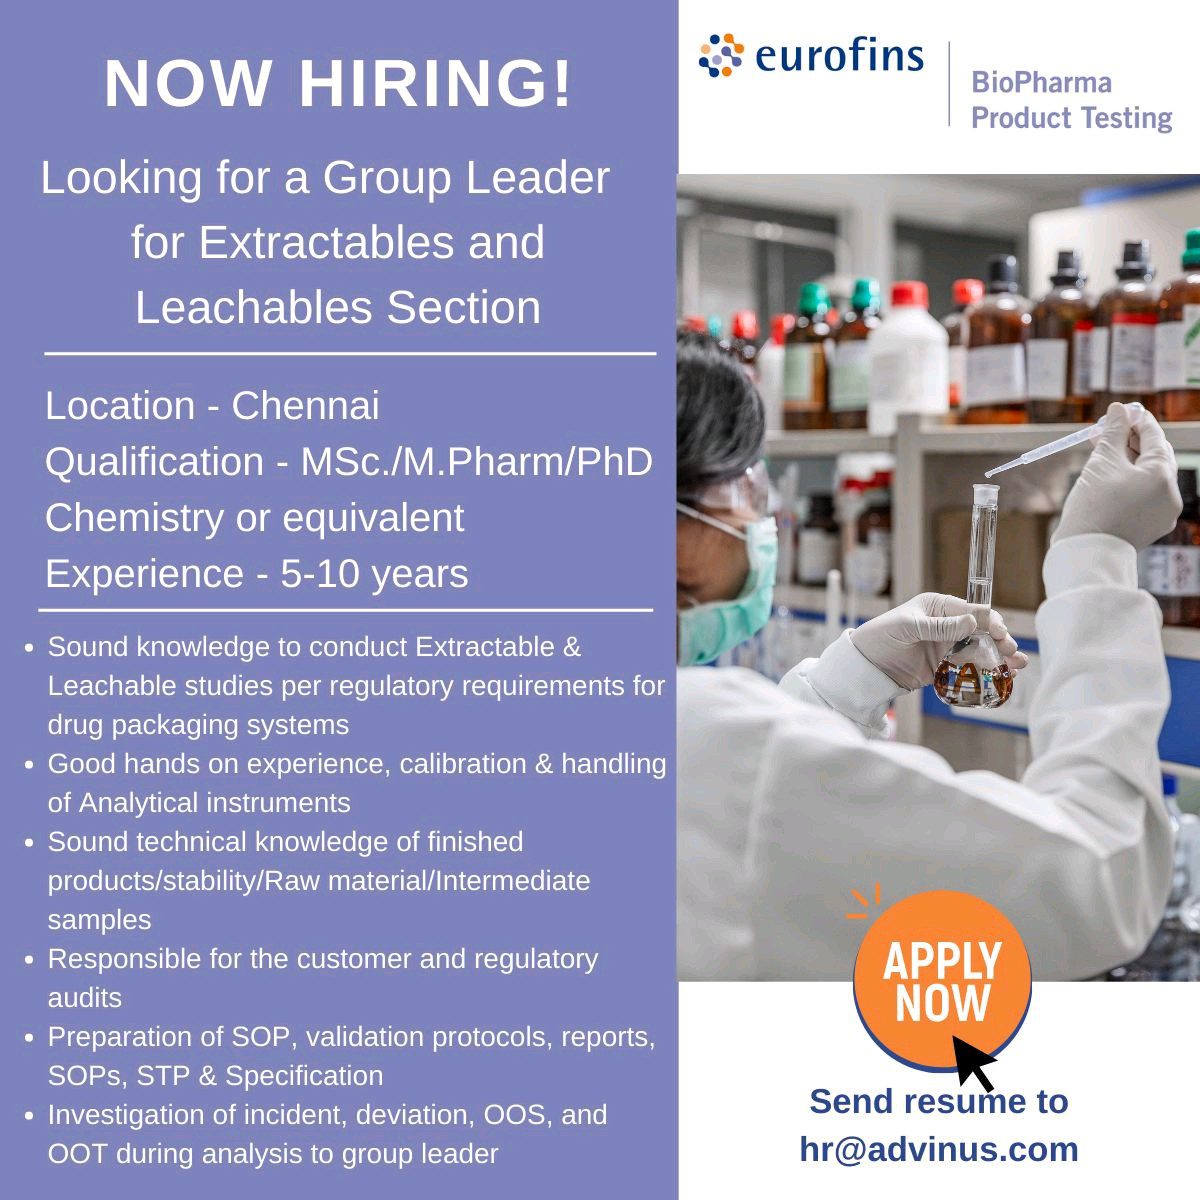 eurofins hiring for freshers experience candidates business development project management research scientist